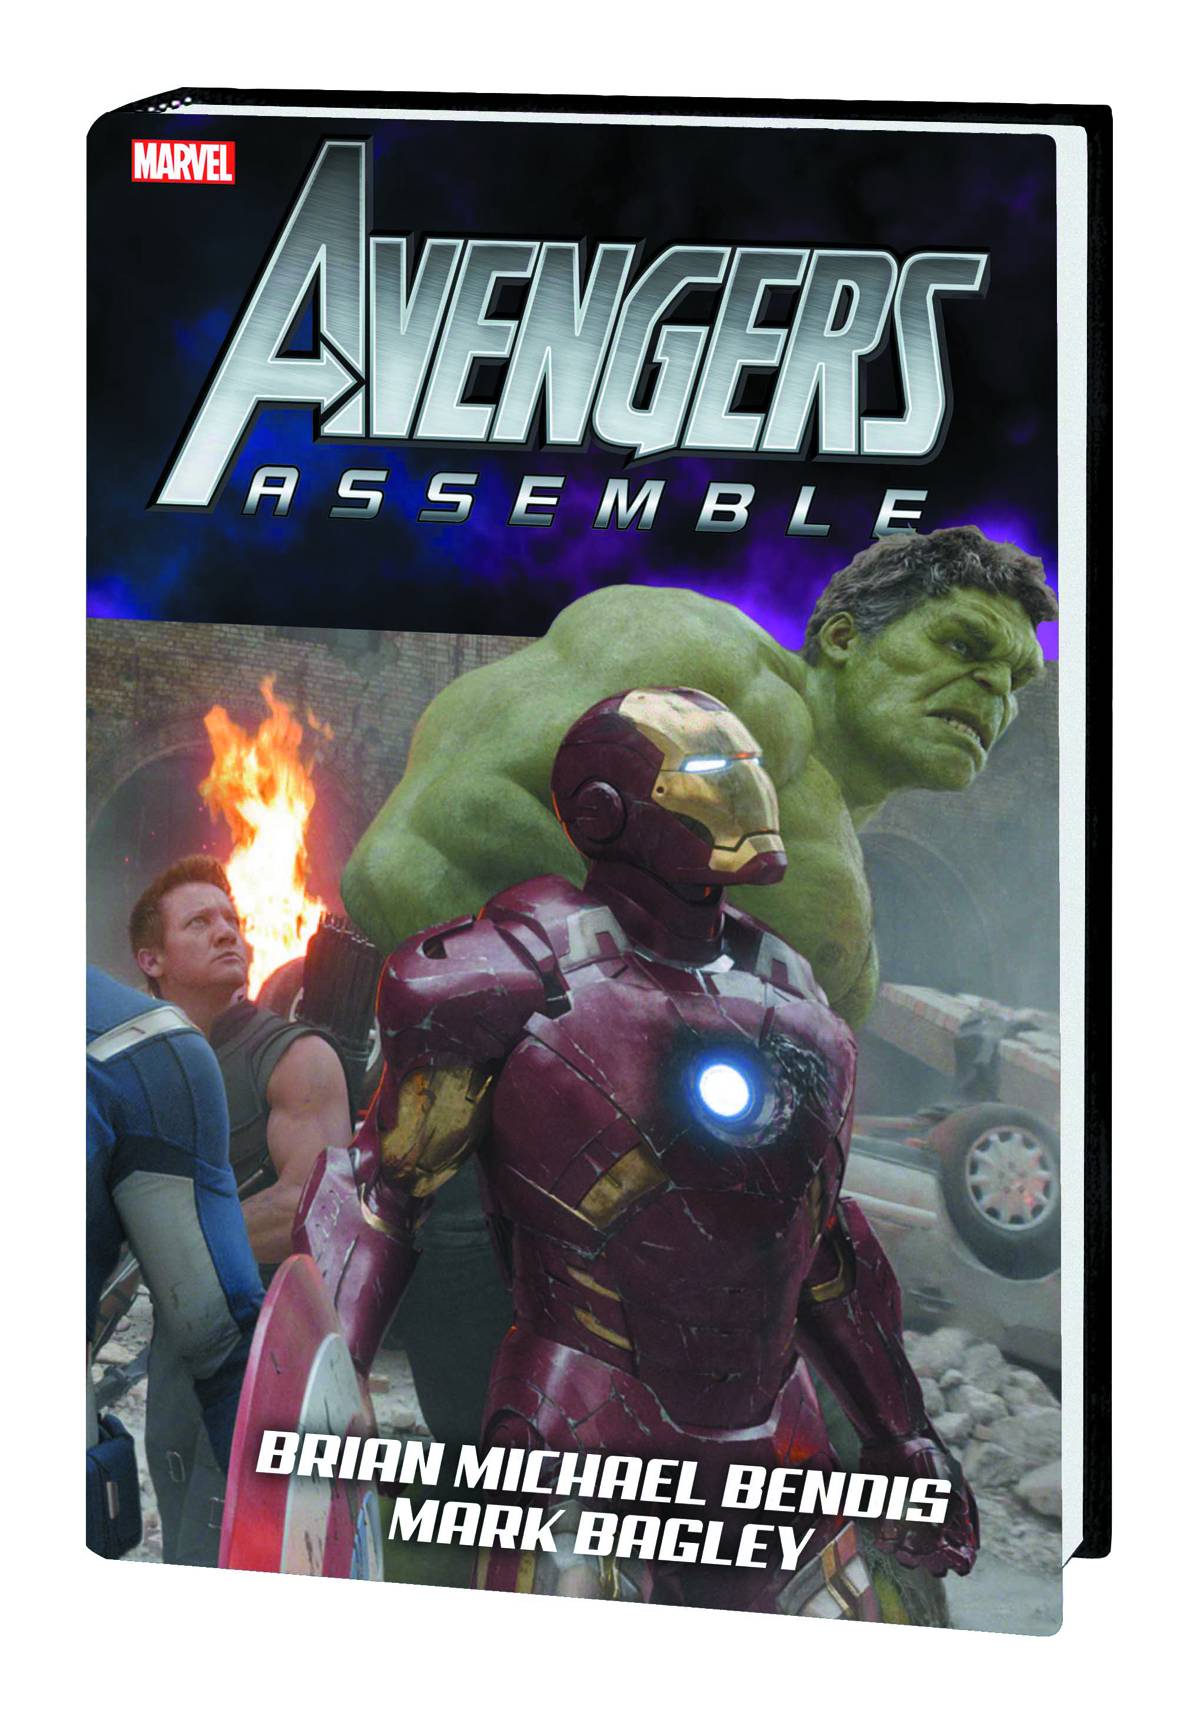 Avengers Assemble by Bendis Hardcover Movie Direct Market Variant Edition